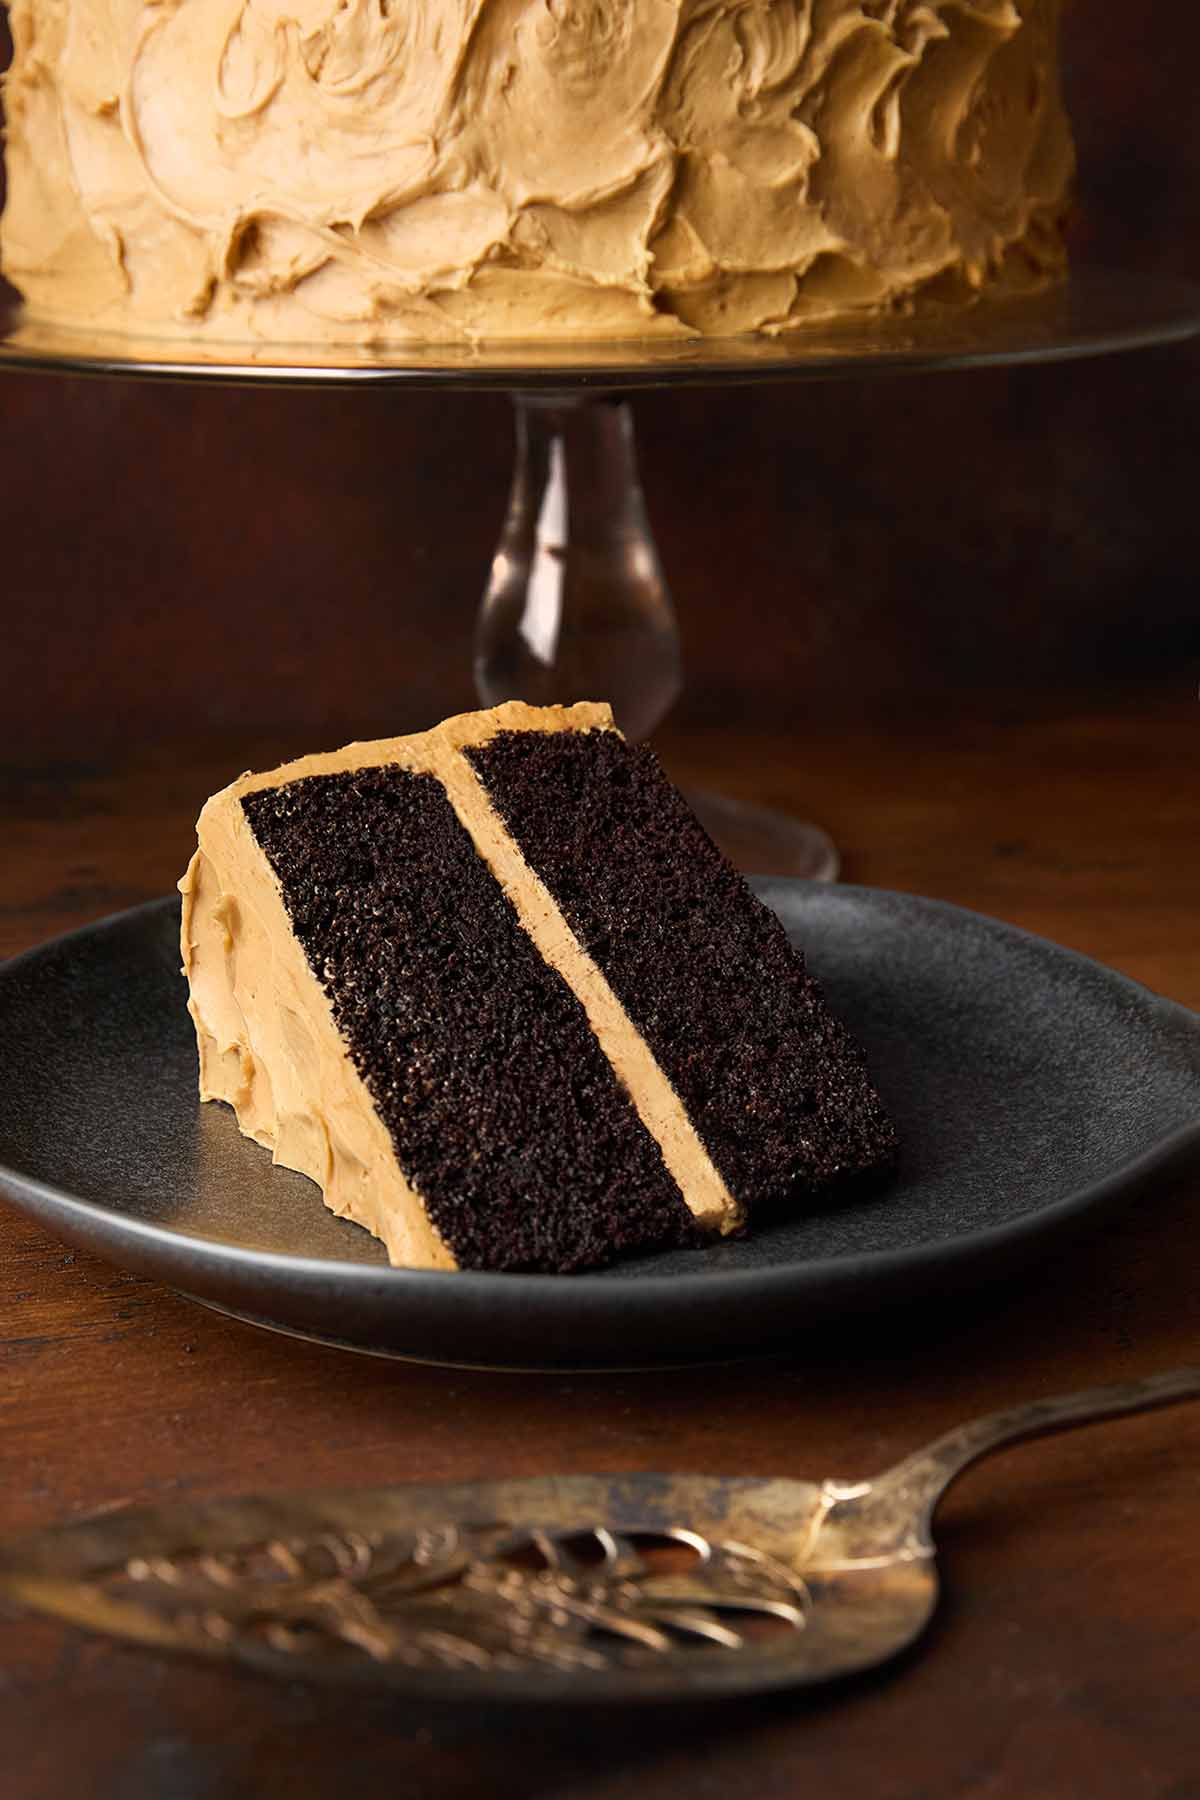 A slice of chocolate caramel cake on a plate, with the rest of the cake in the background.